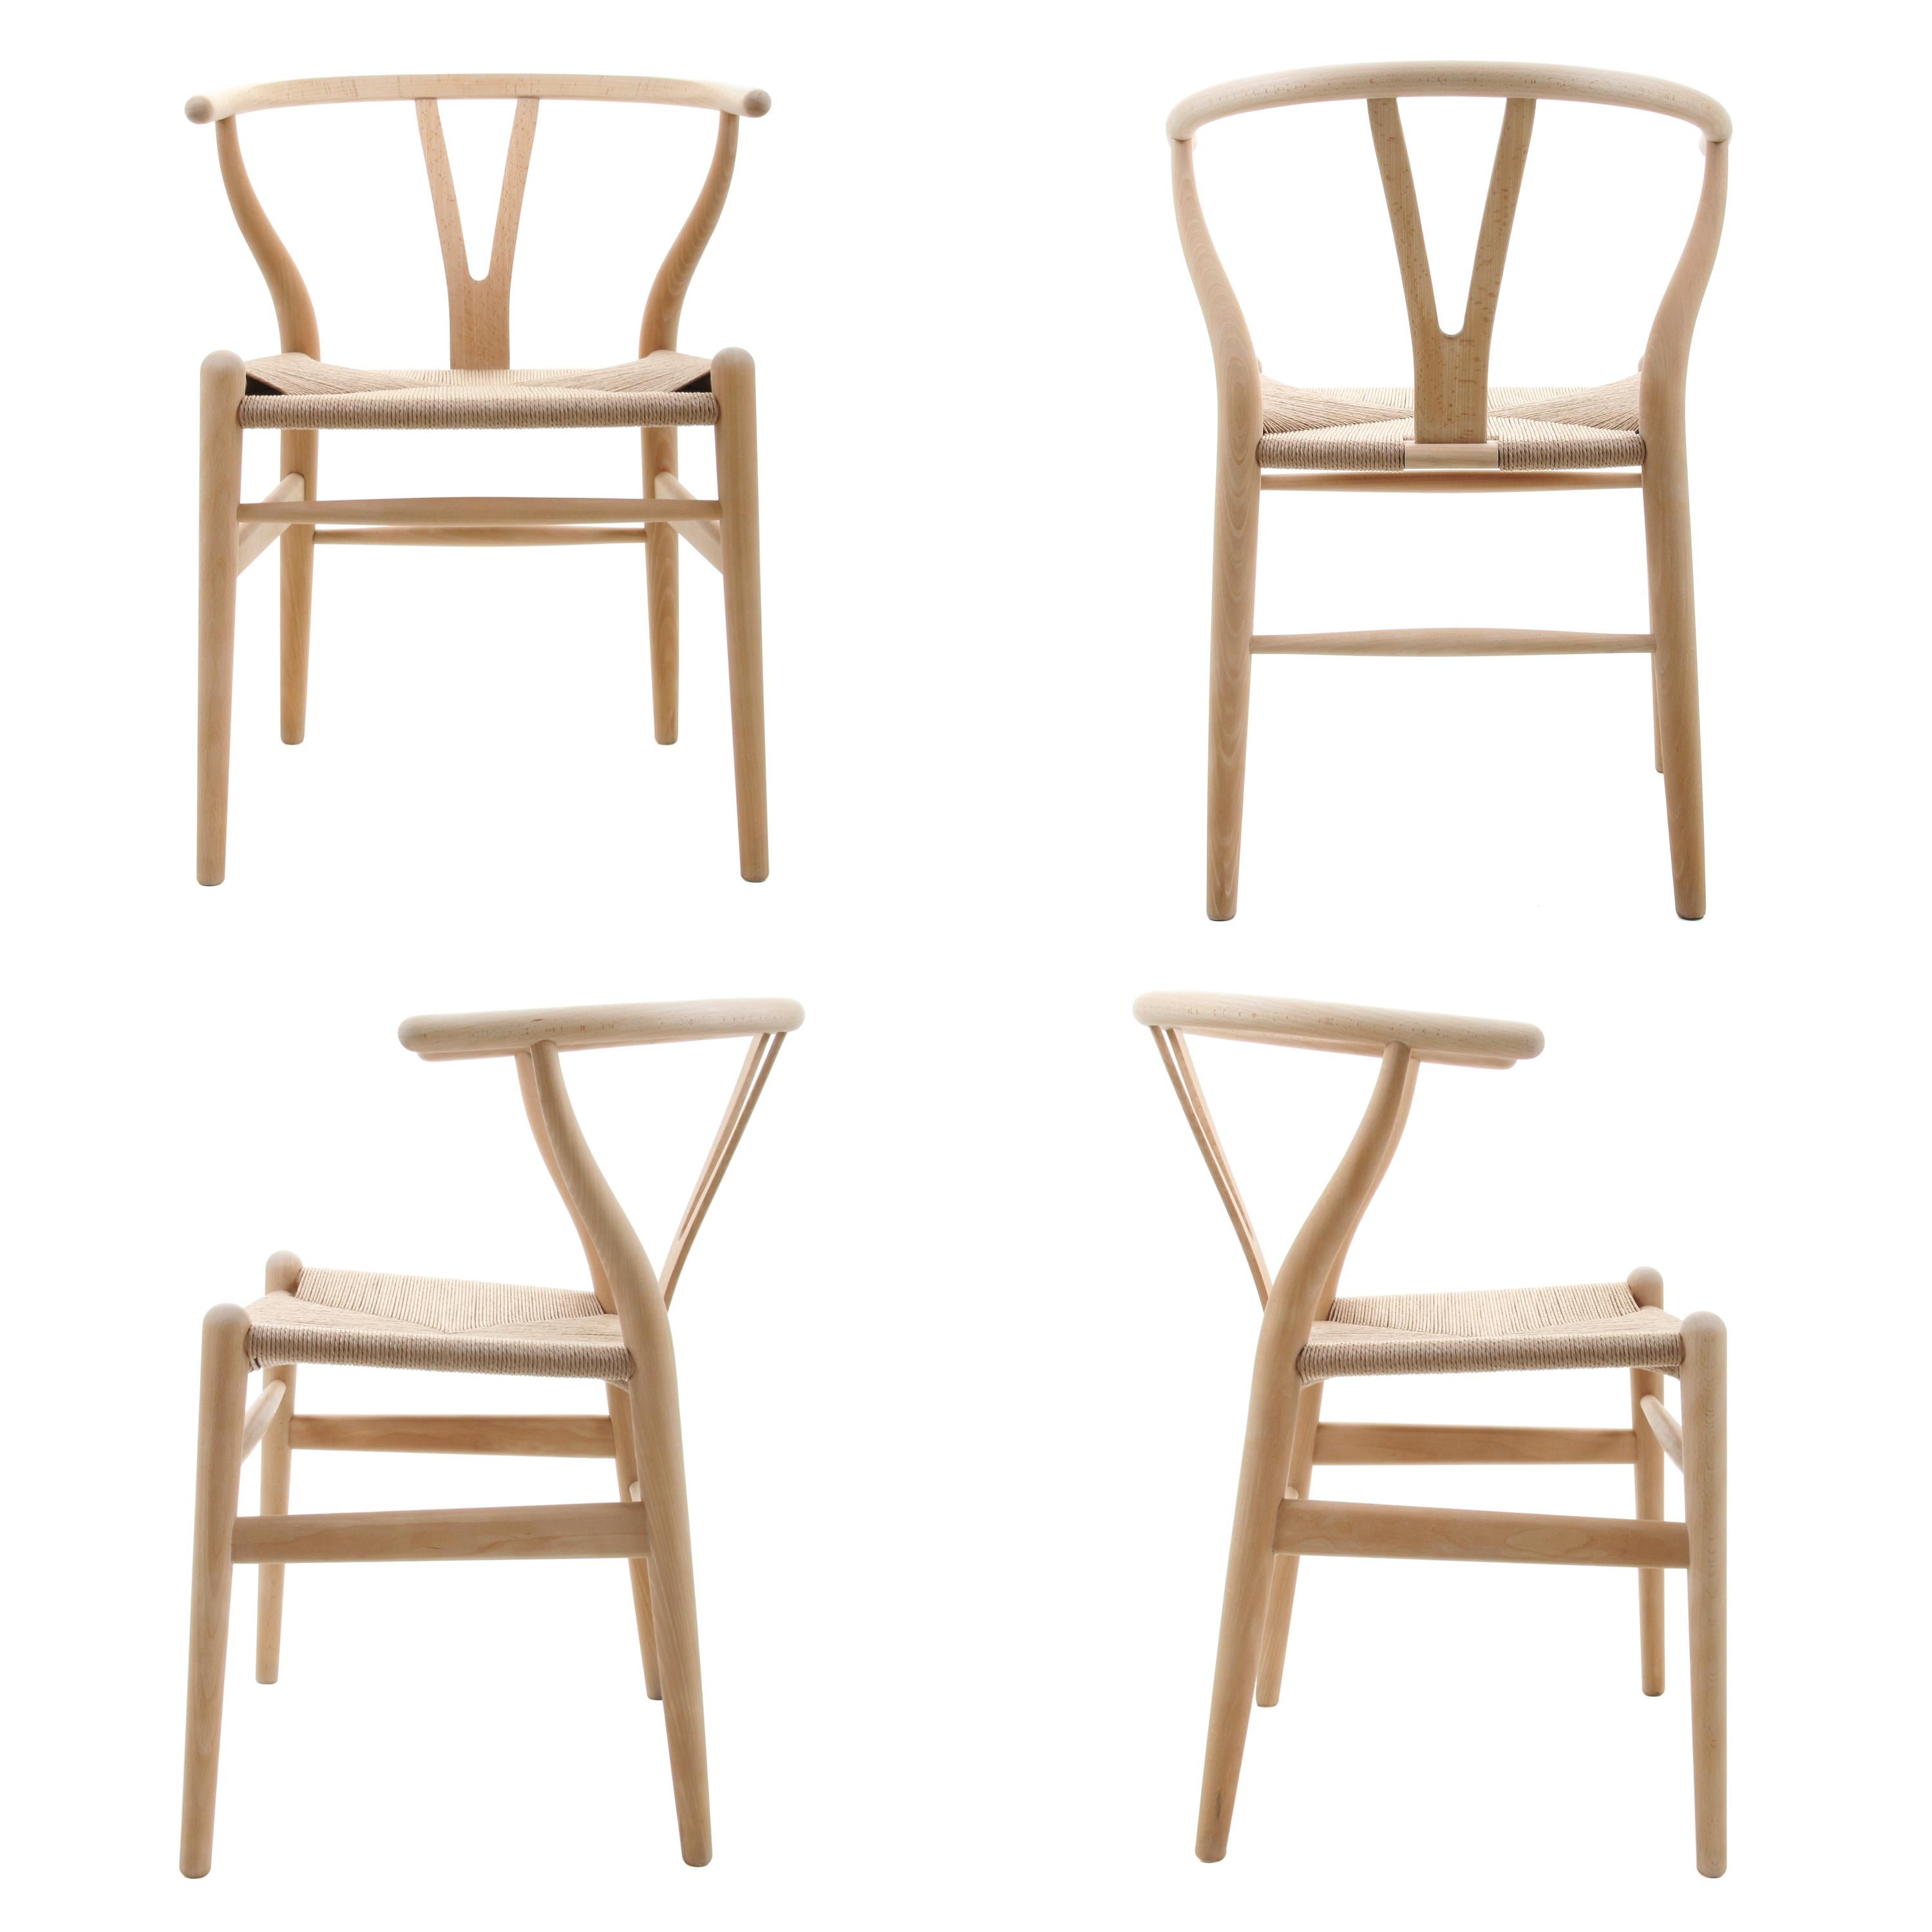 Hand-Woven CH24 Wishbone Chairs 'Pair' by Wegner for Carl Hansen & Son in 1949, New Seat